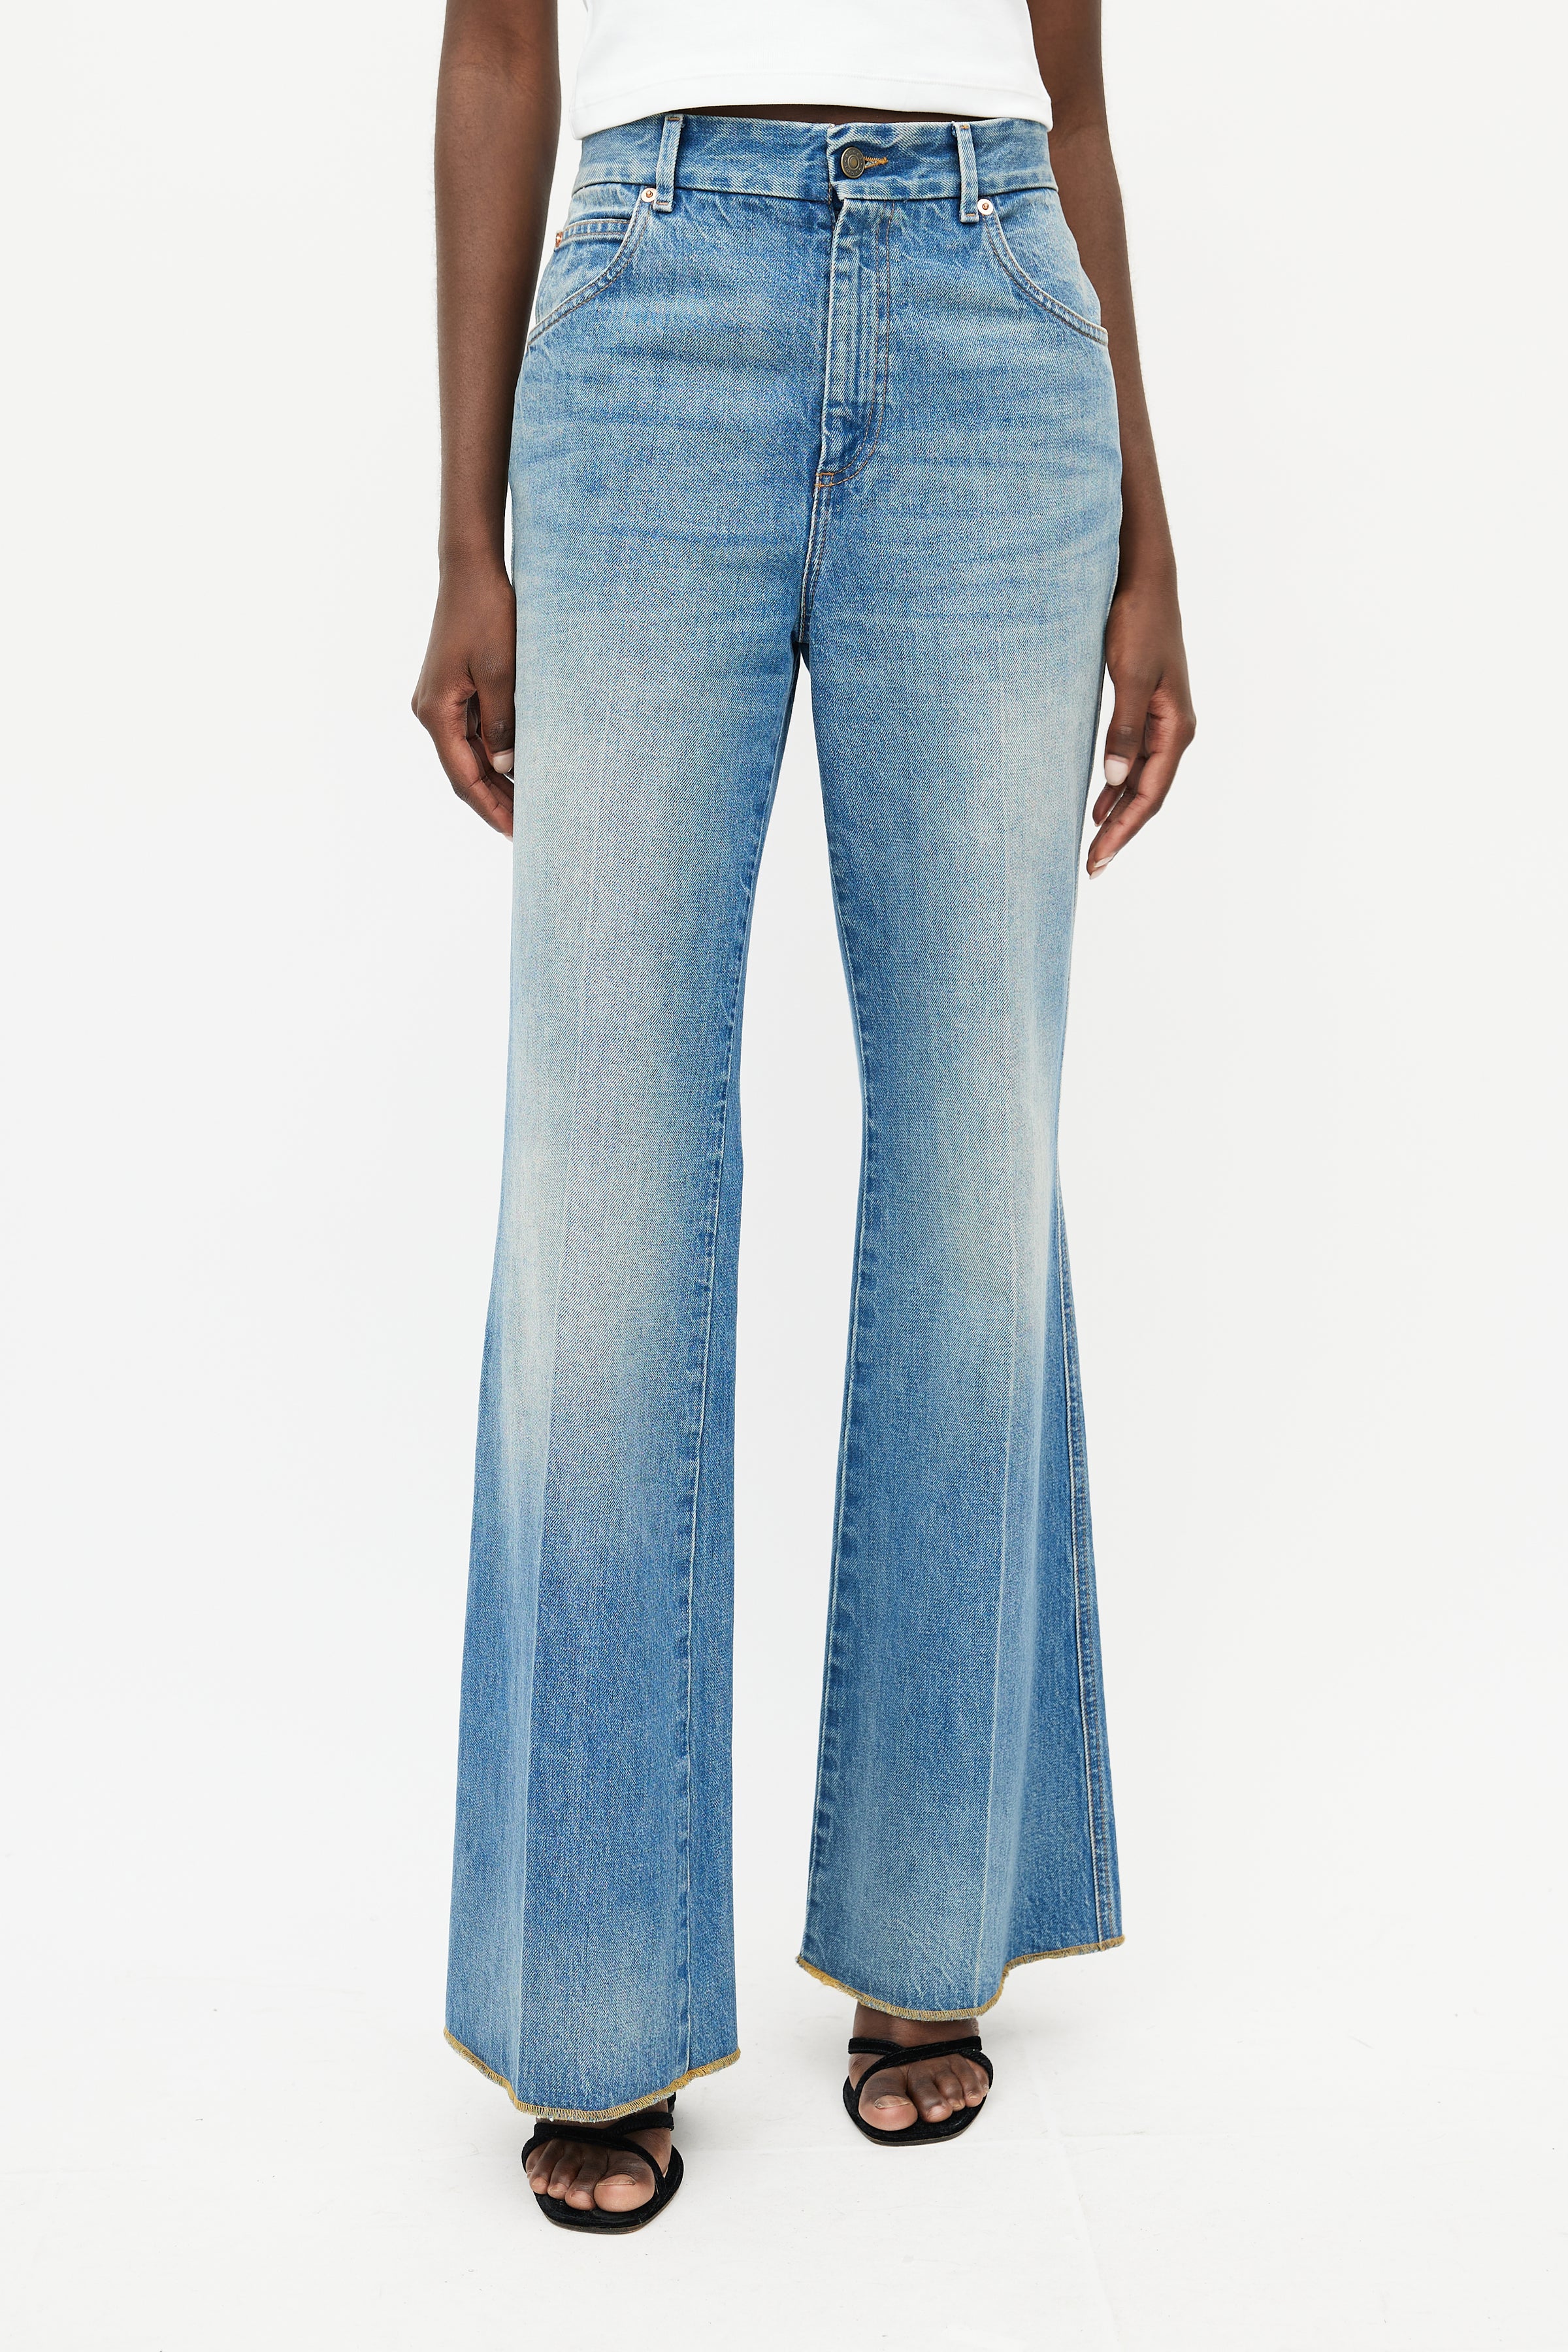 Gucci Women's High-Rise Flared Jeans - Blue